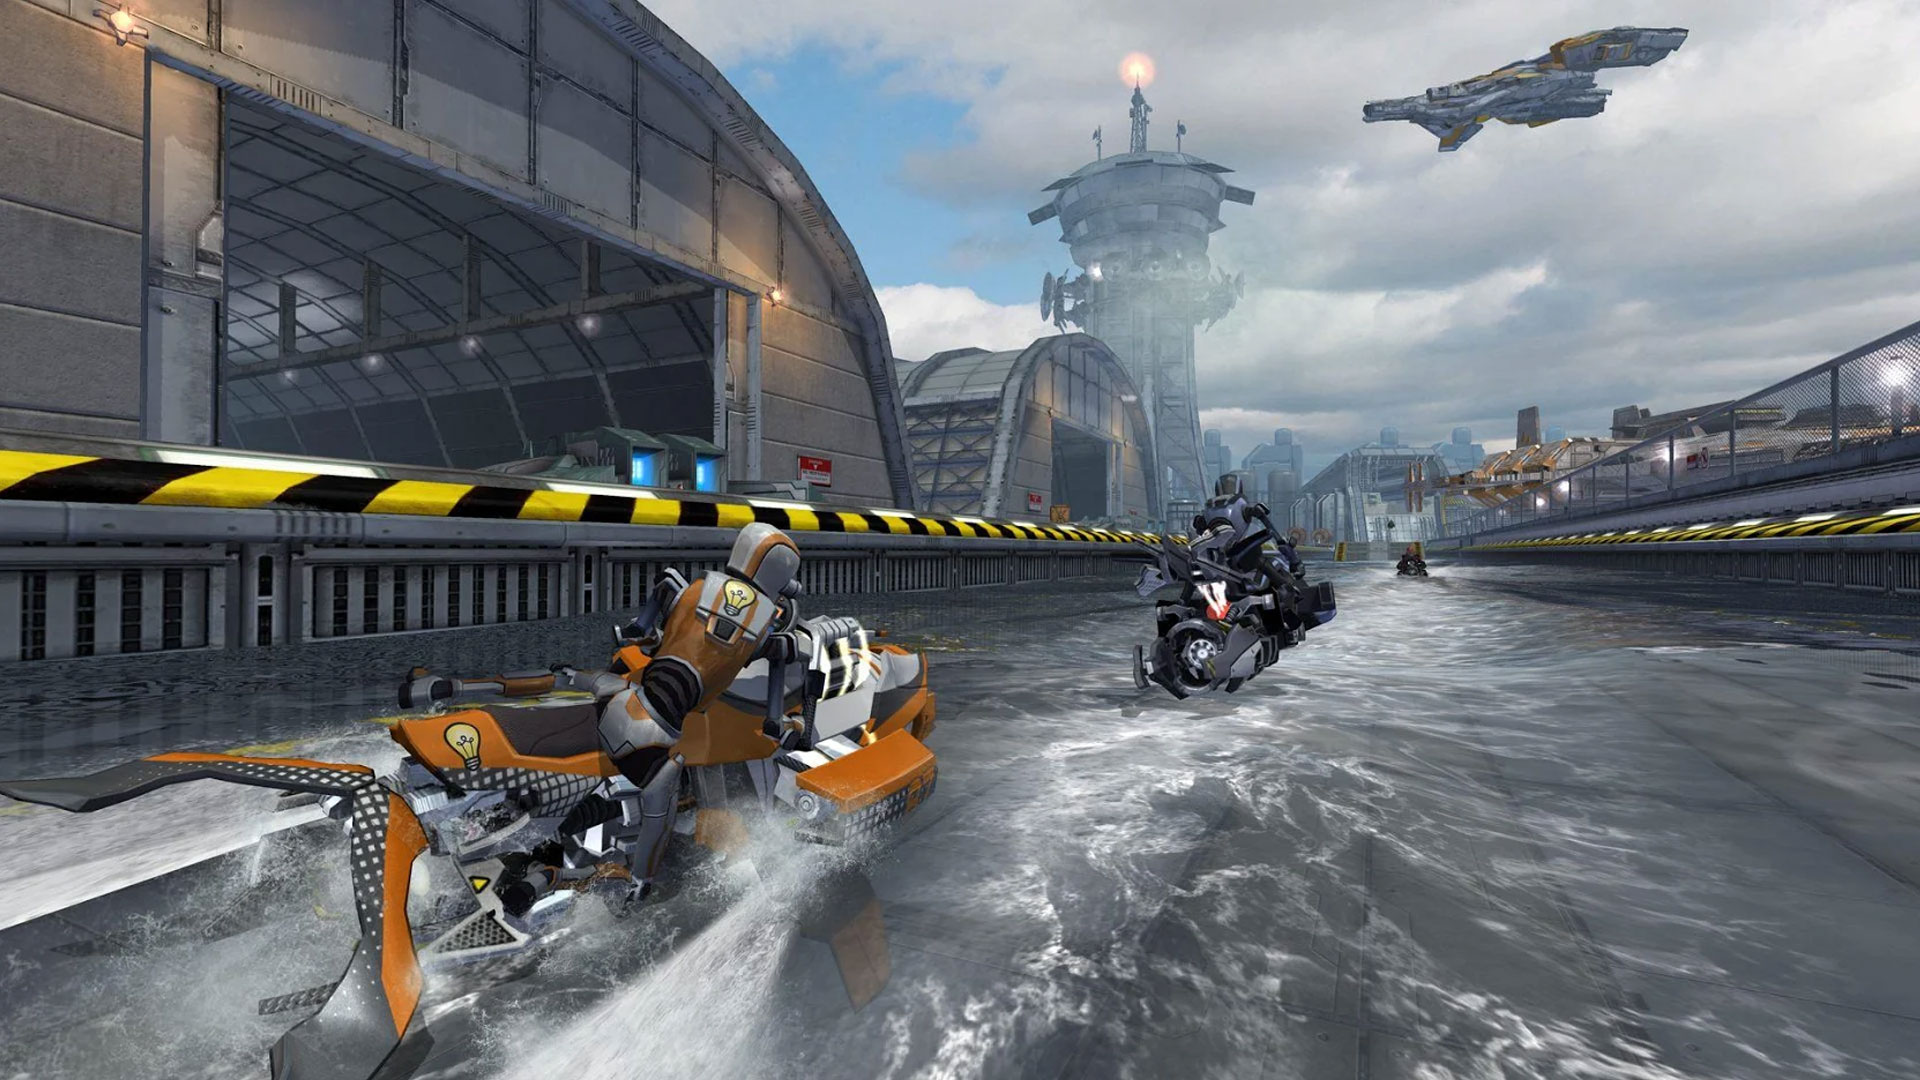 Battle with other players in Riptide GP: Renegade